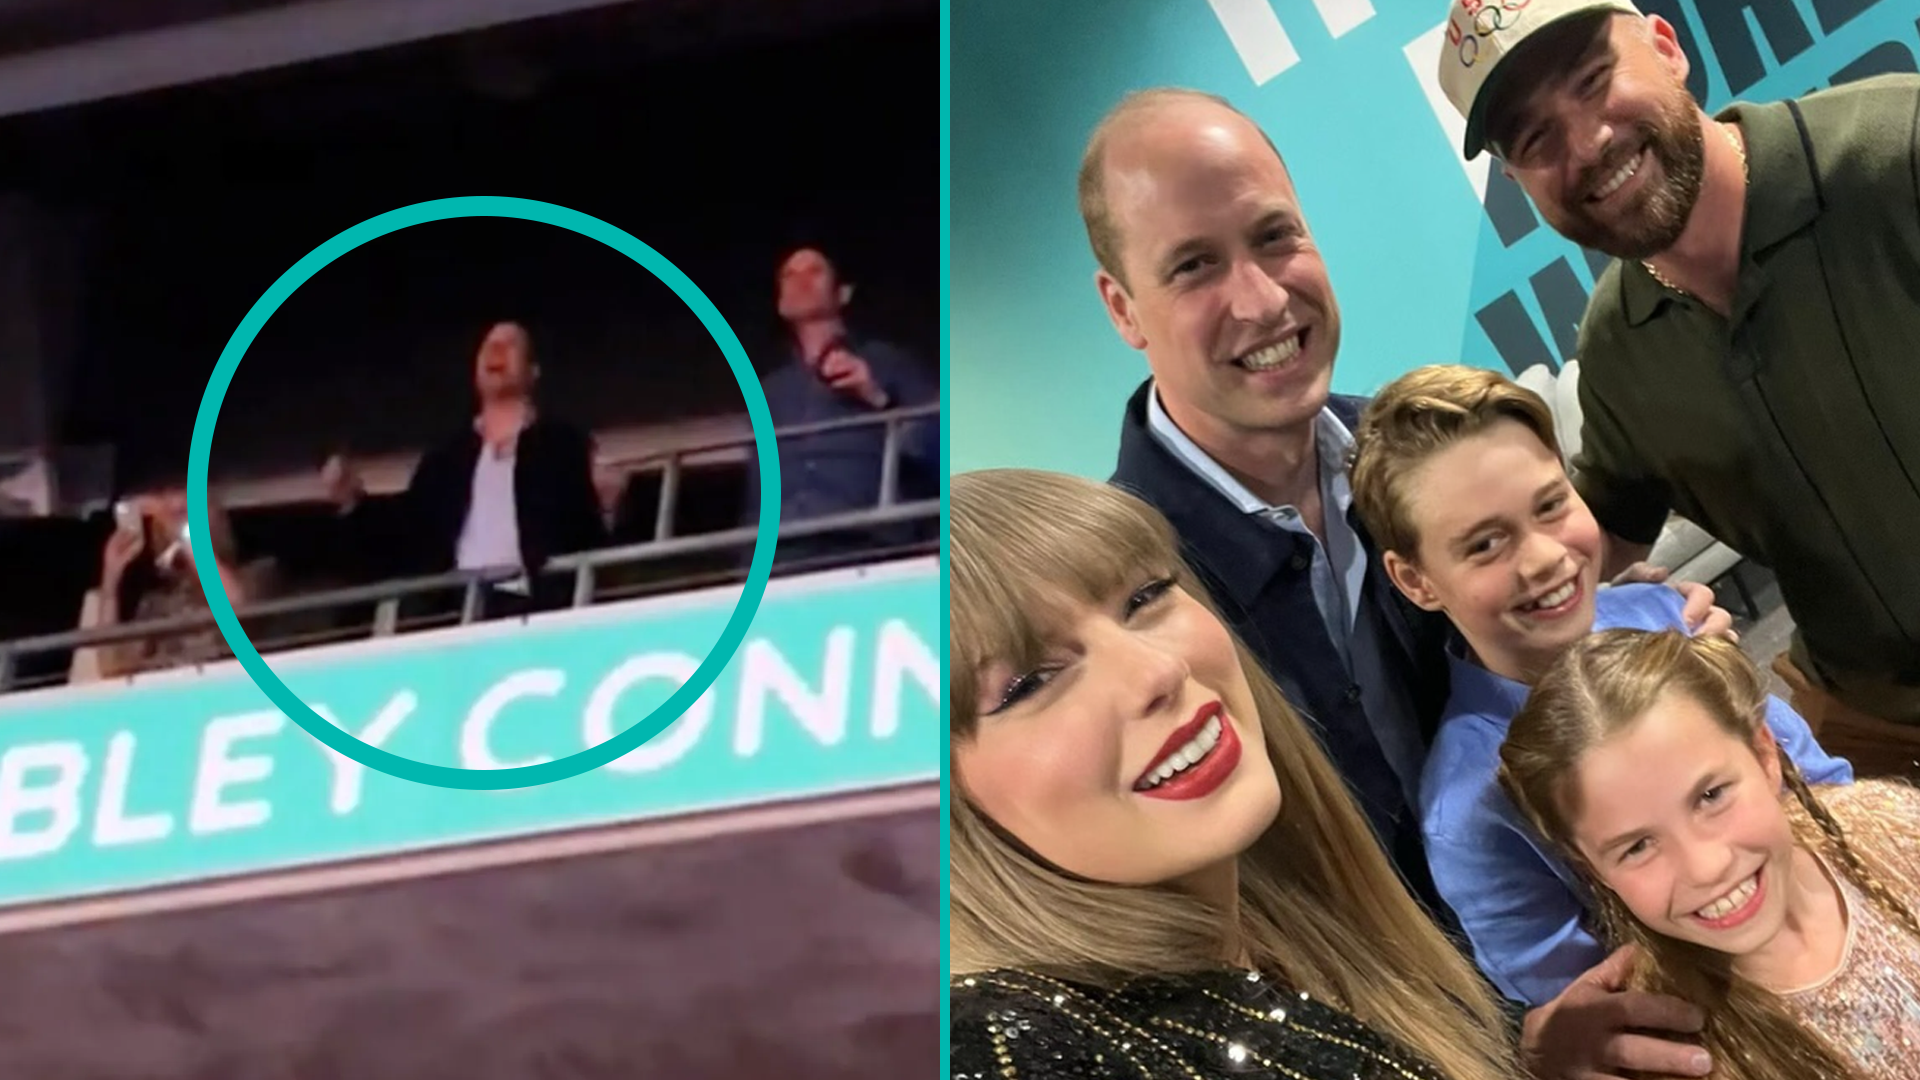 Prince william dancing at taylor swift